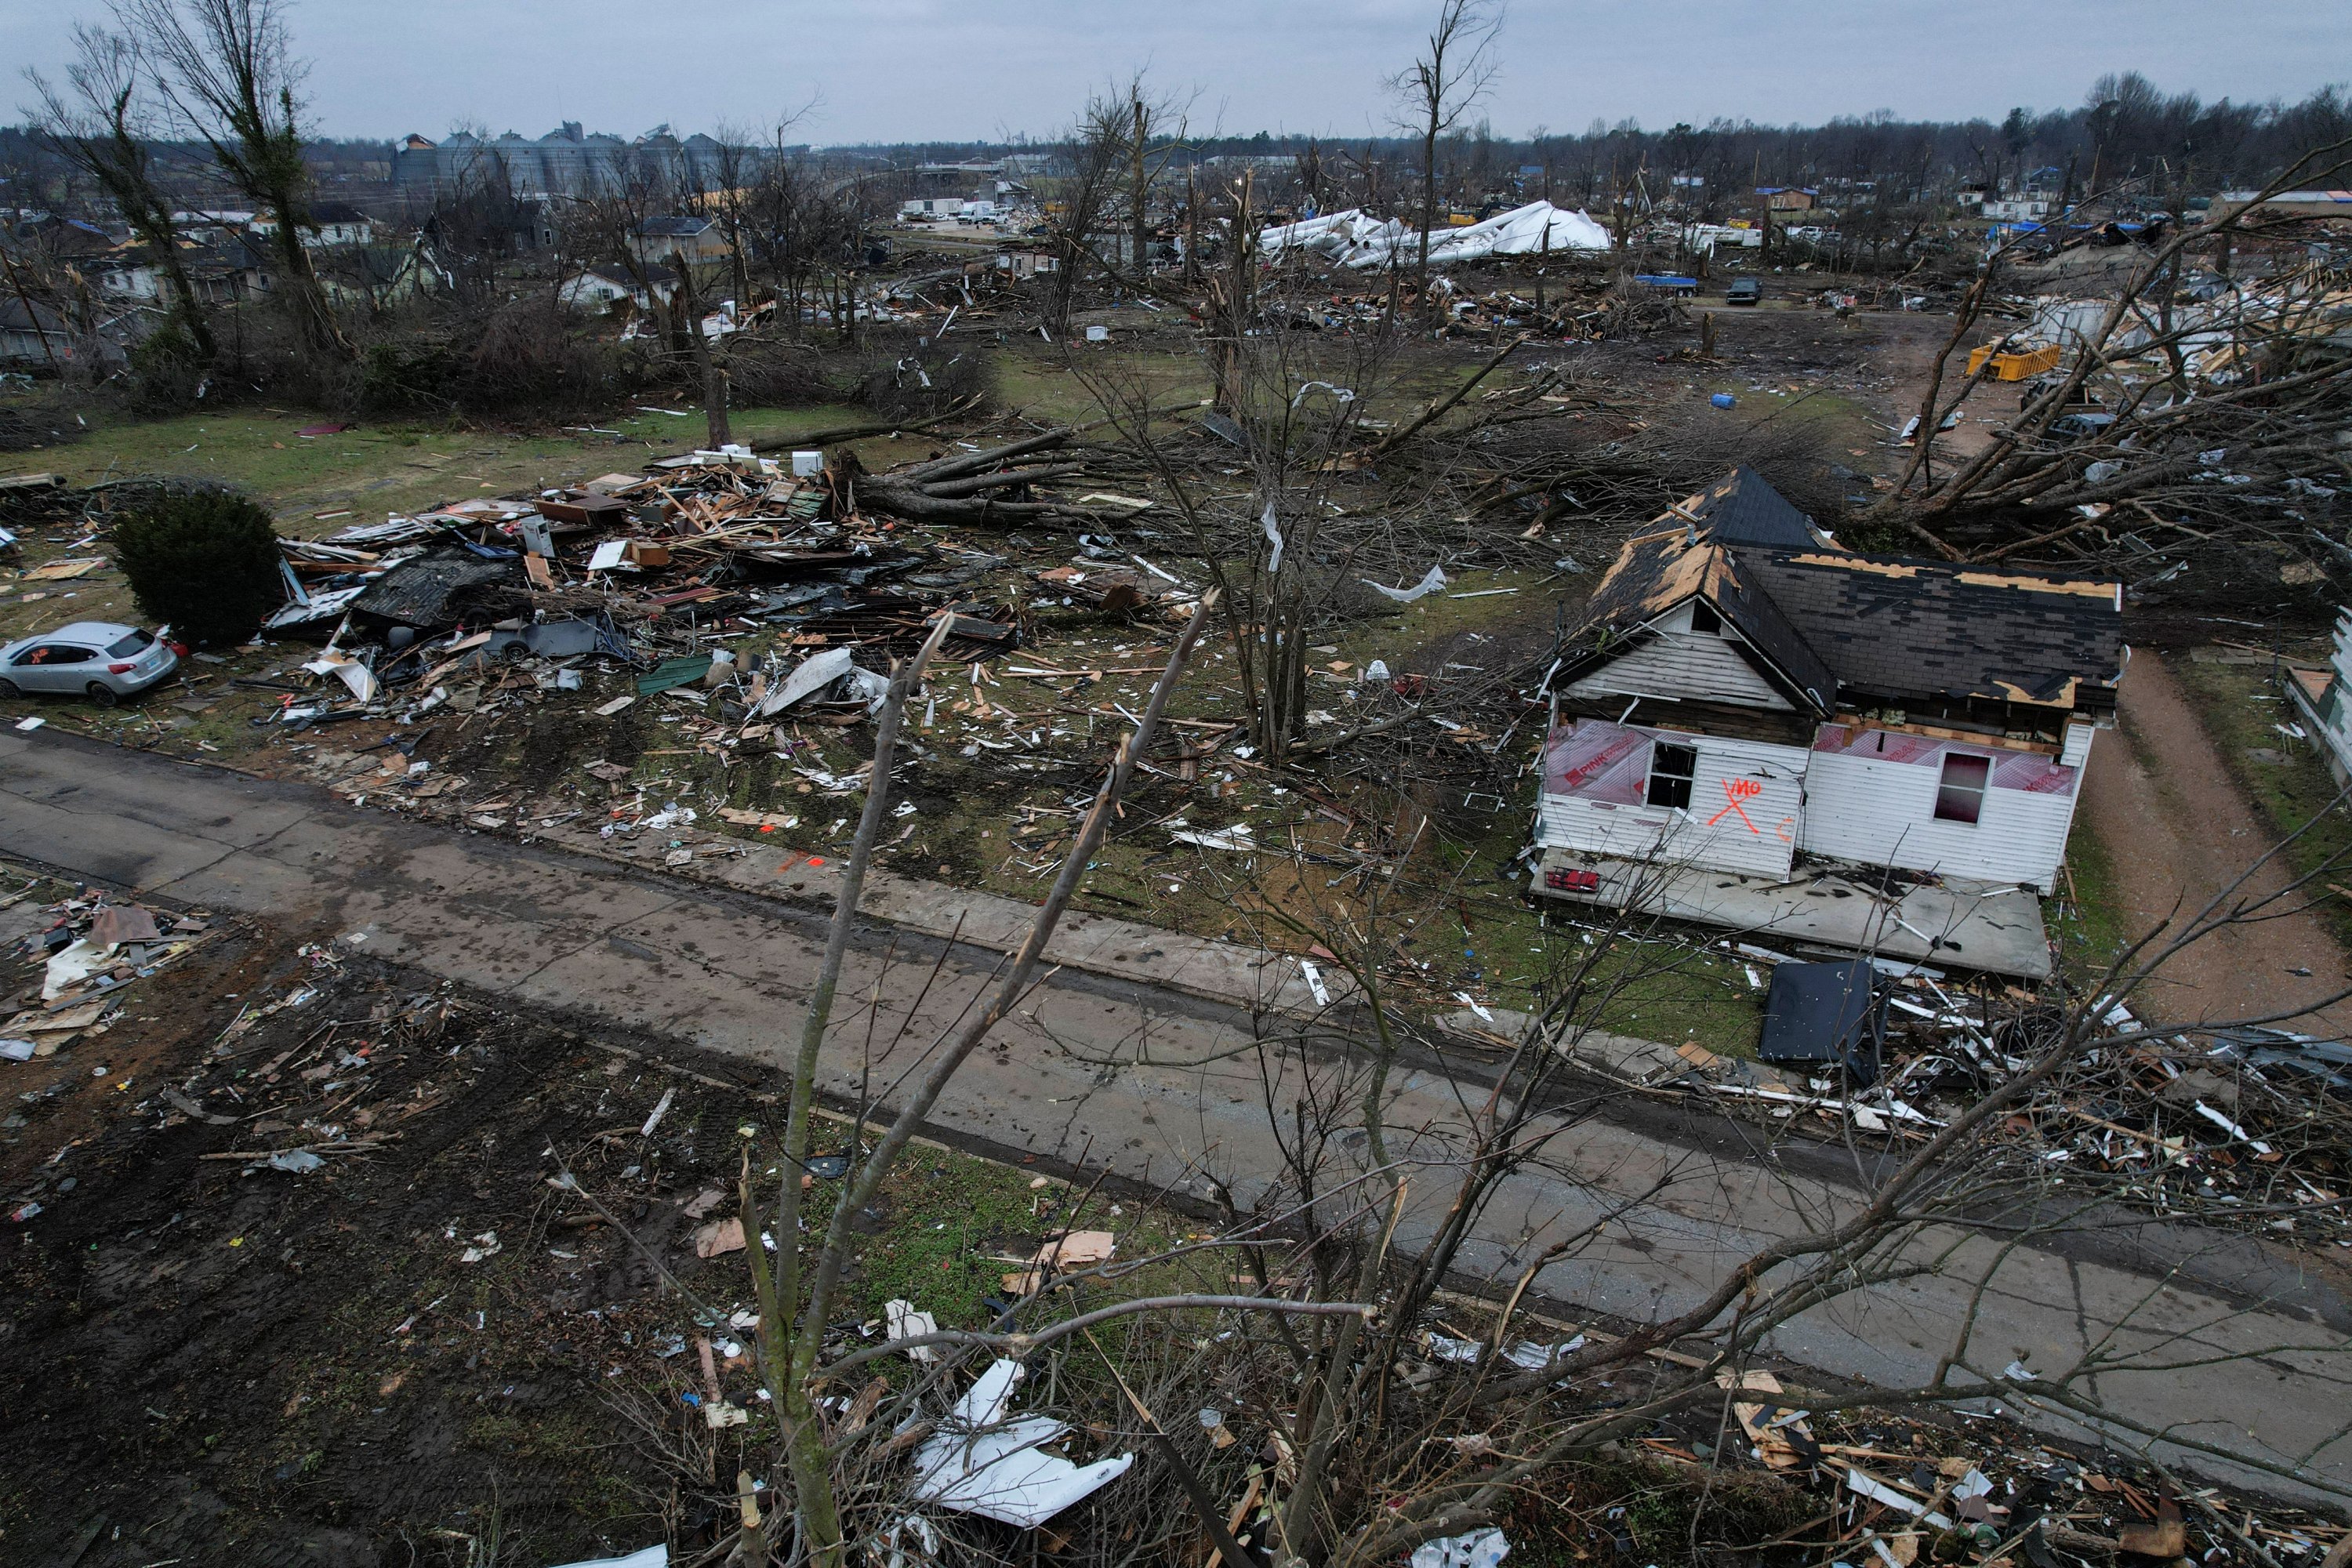 The home of Denise Jones, 37, is one of the last homes seen standing in her neighborhood after a devastating outbreak of tornadoes passed through several U.S. states in Mayfield, Kentucky, U.S., Dec. 19, 2021. (Reuters Photo)